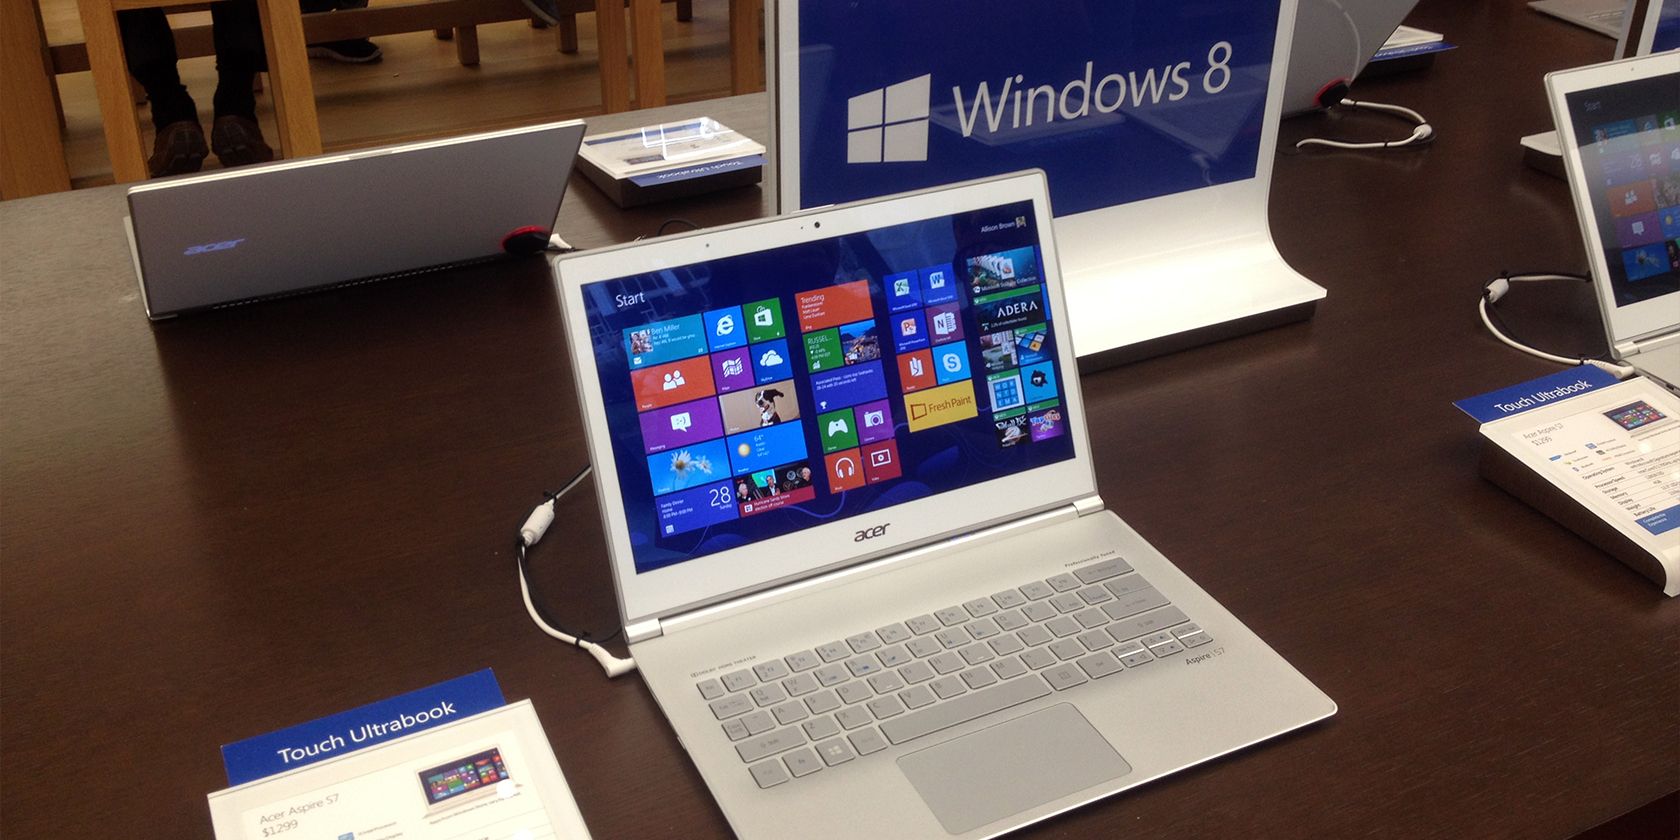 Windows 8 laptop with a touchscreen